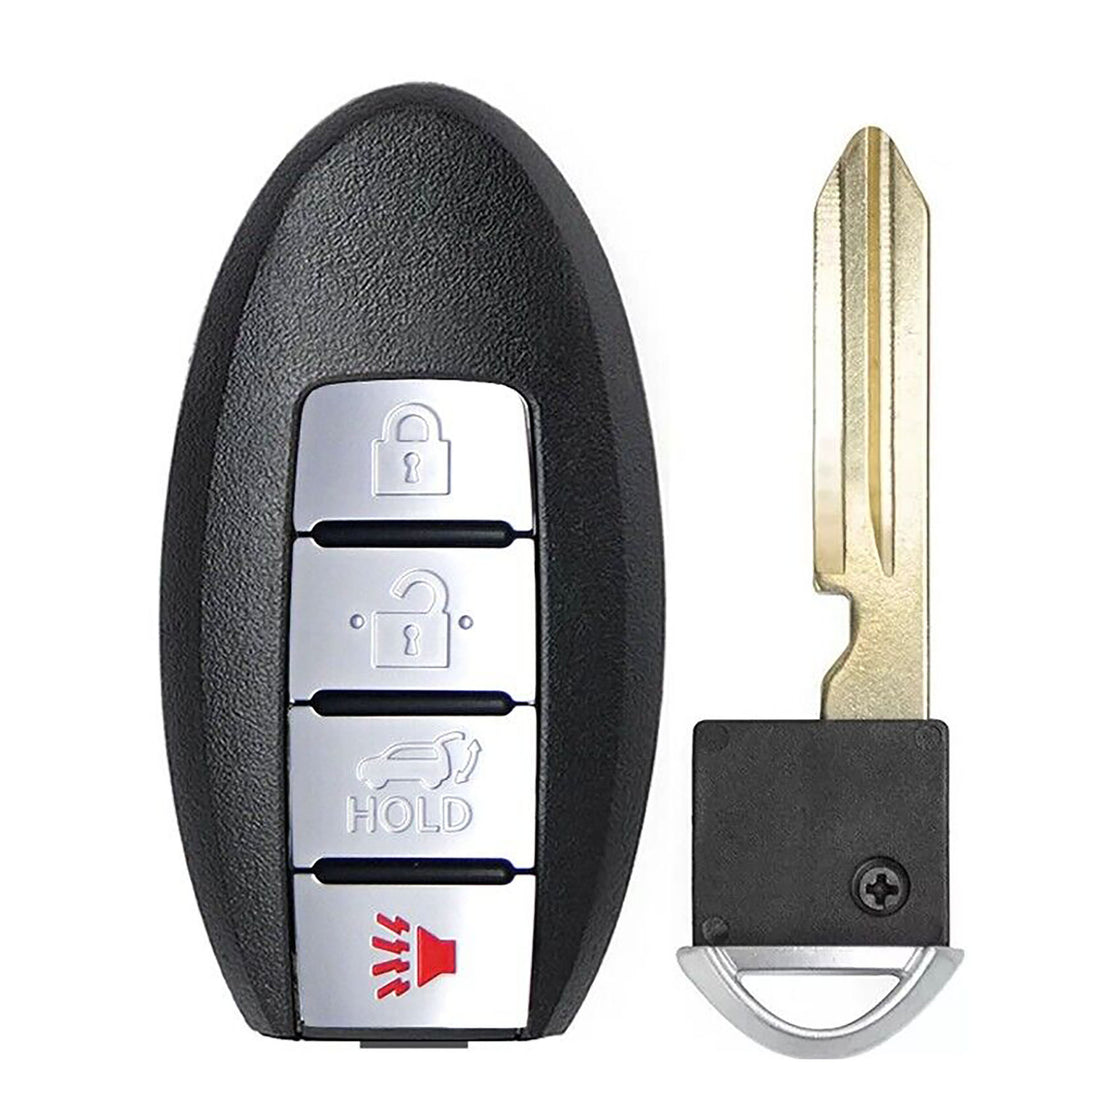 1x New Replacement Proximity Key Fob Compatible with & Fit For Nissan Infiniti Read Description - MPN CWTWB1U787-04